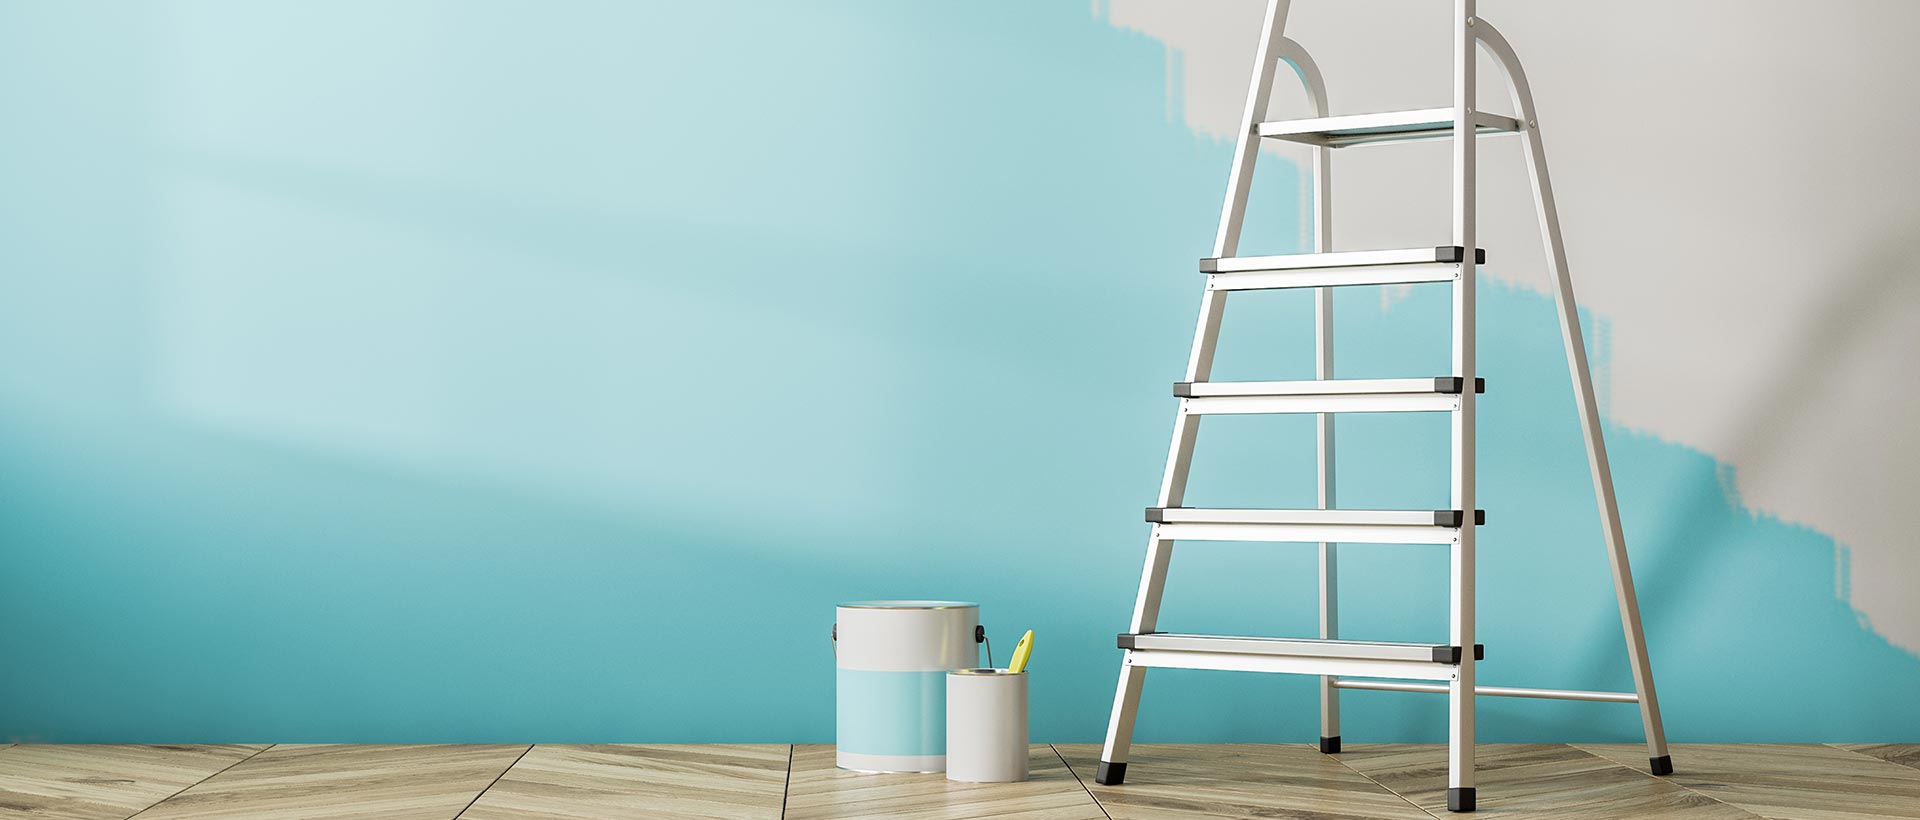 Tips to maintain white wall paint- Berger Blog